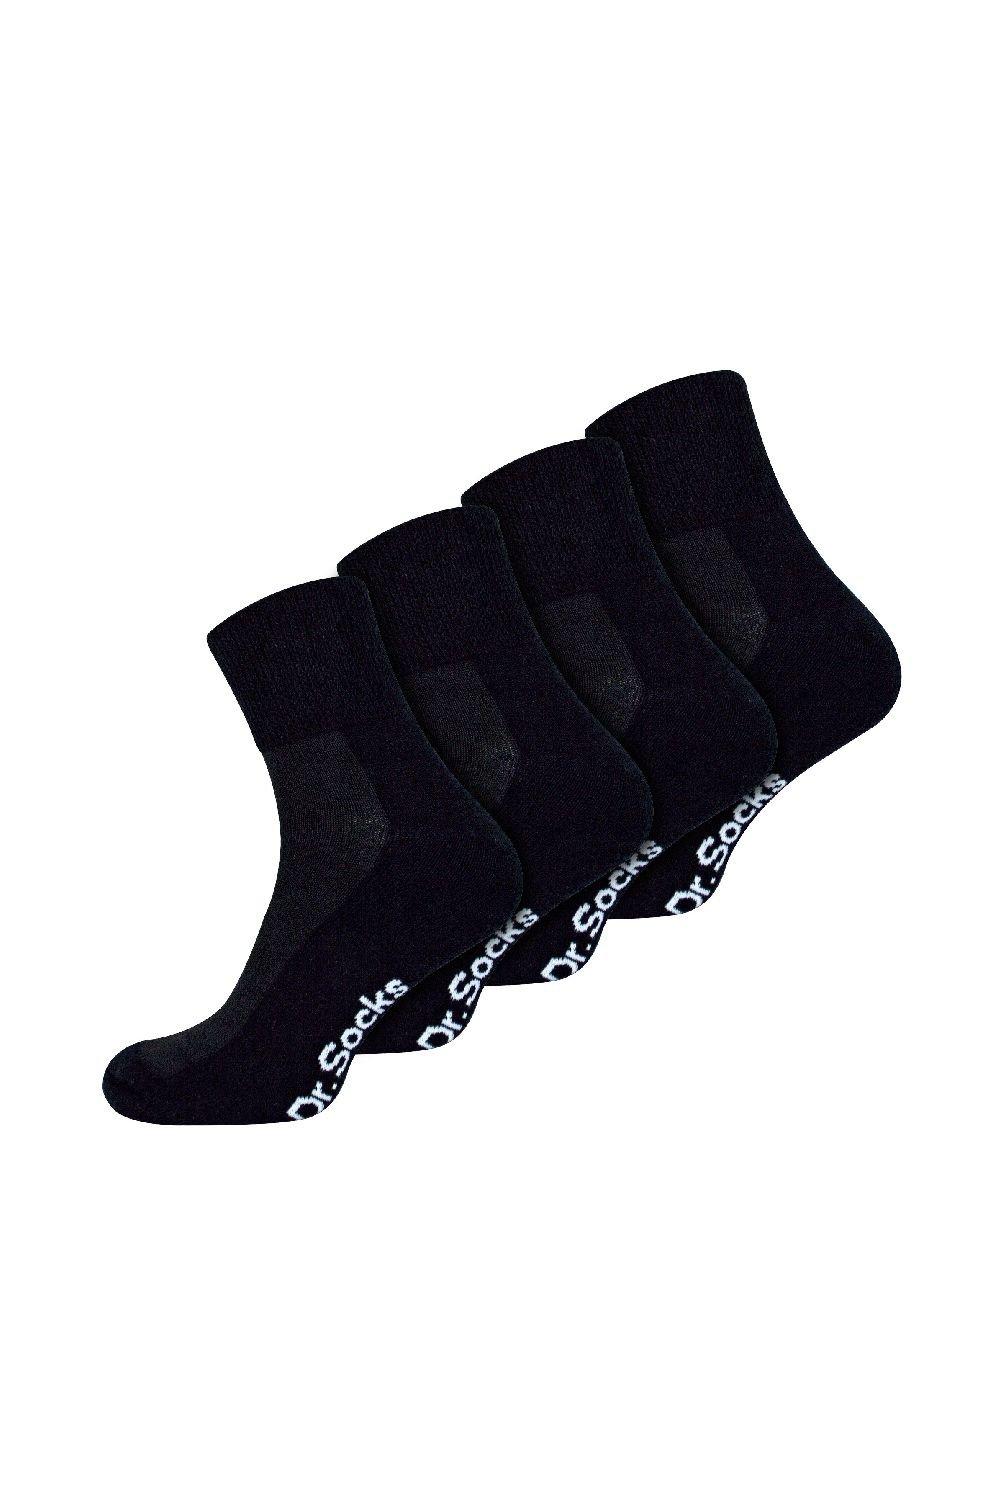 Extra Wide Soft Bamboo Diabetic Ankle Trainer Socks for Swollen Feet